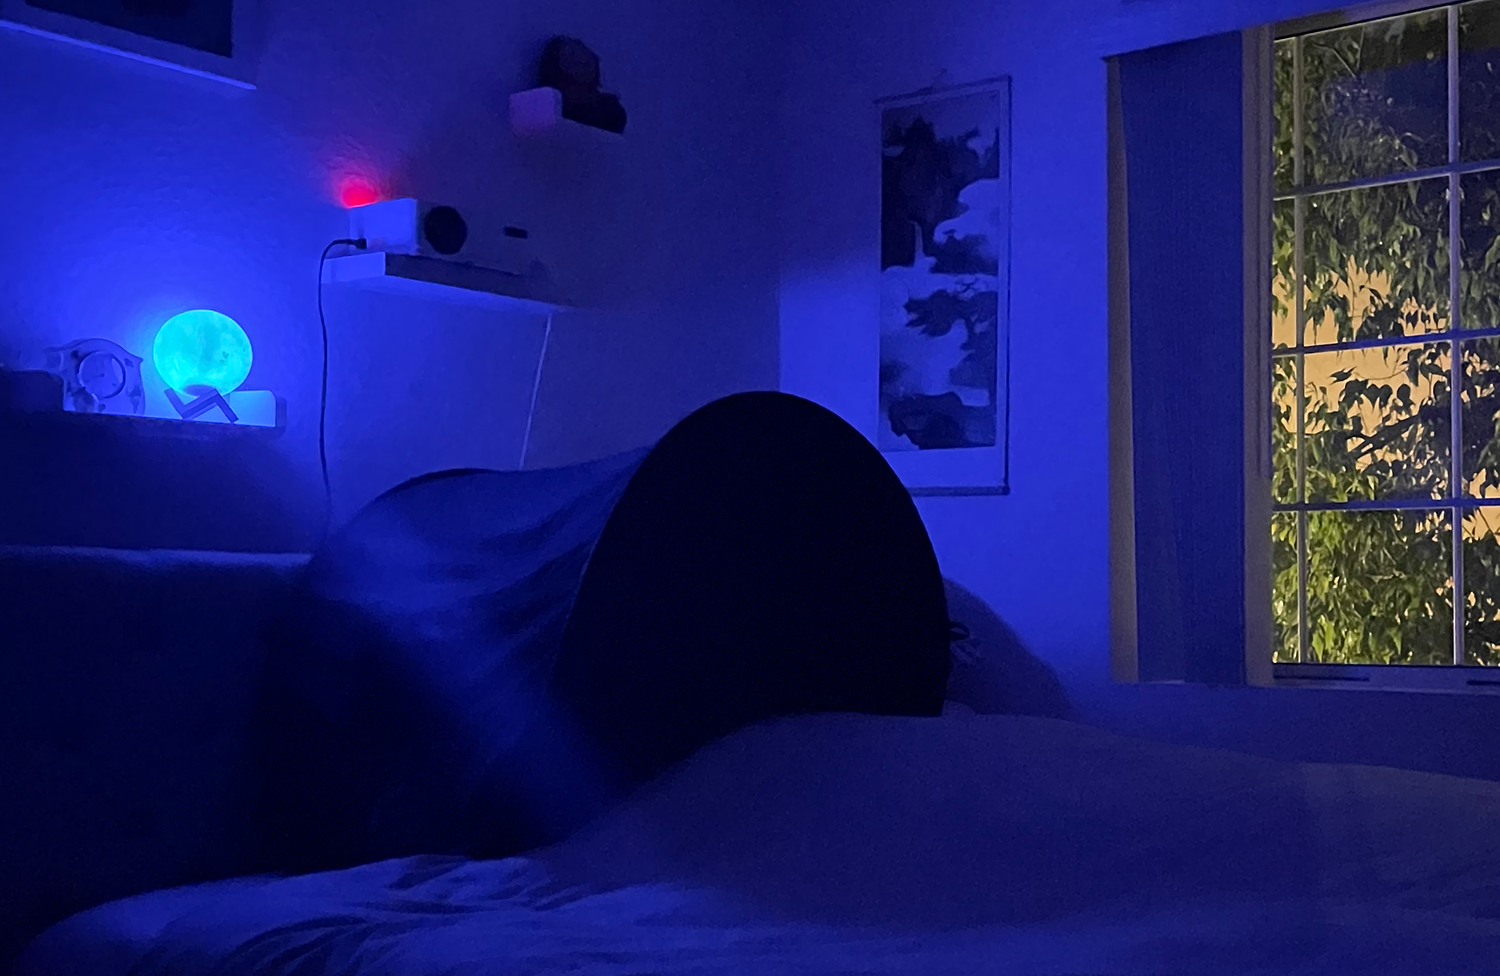 Ambient light in bedroom can affect sleep health, cause sleep latency. zDen sleep aid can help without melantonin